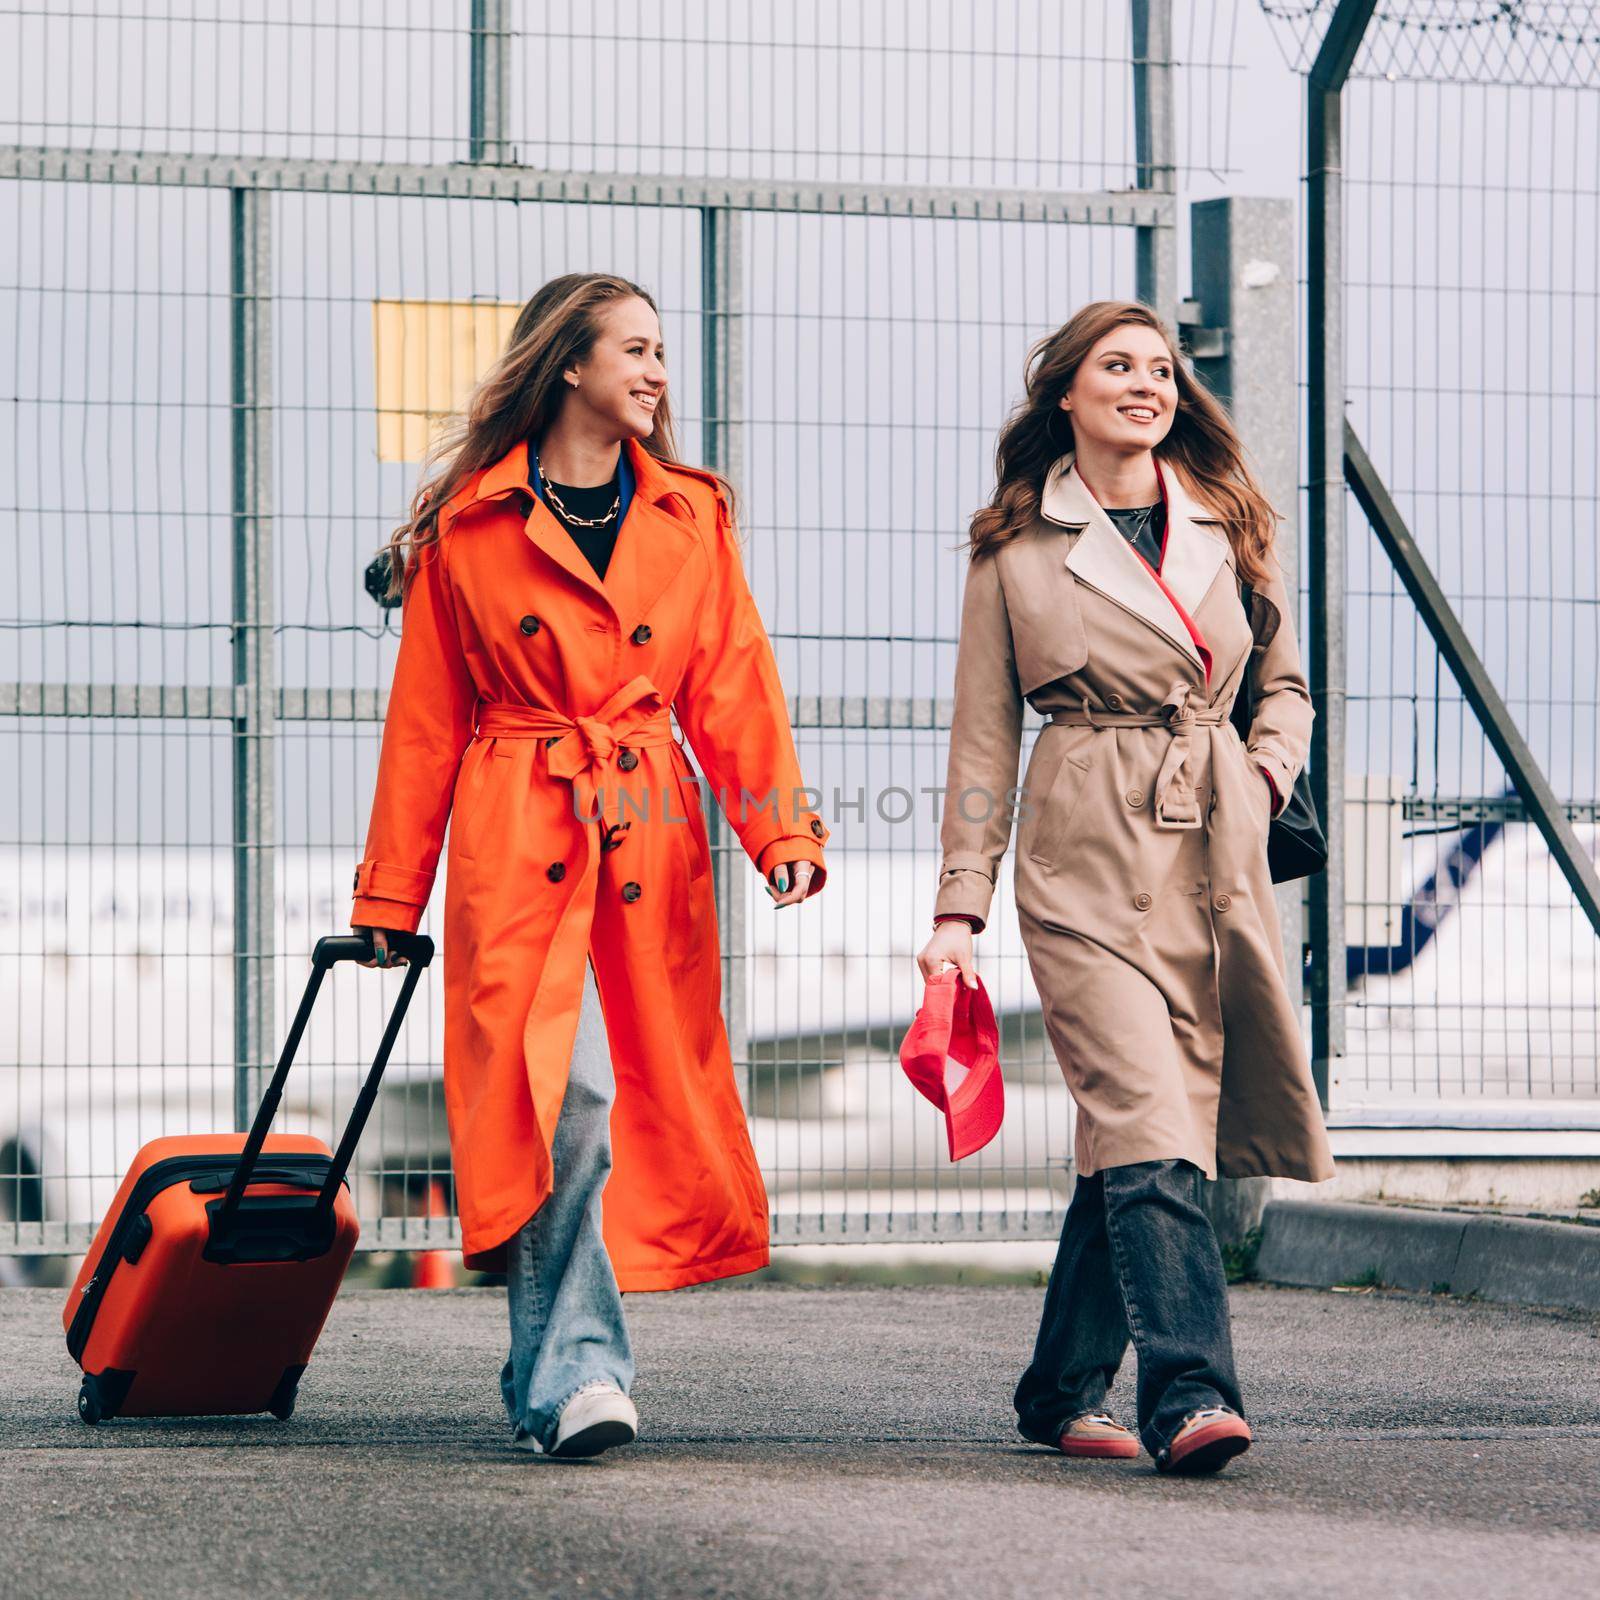 Two happy girls walking near airport, with luggage. Air travel, summer holiday by Ashtray25